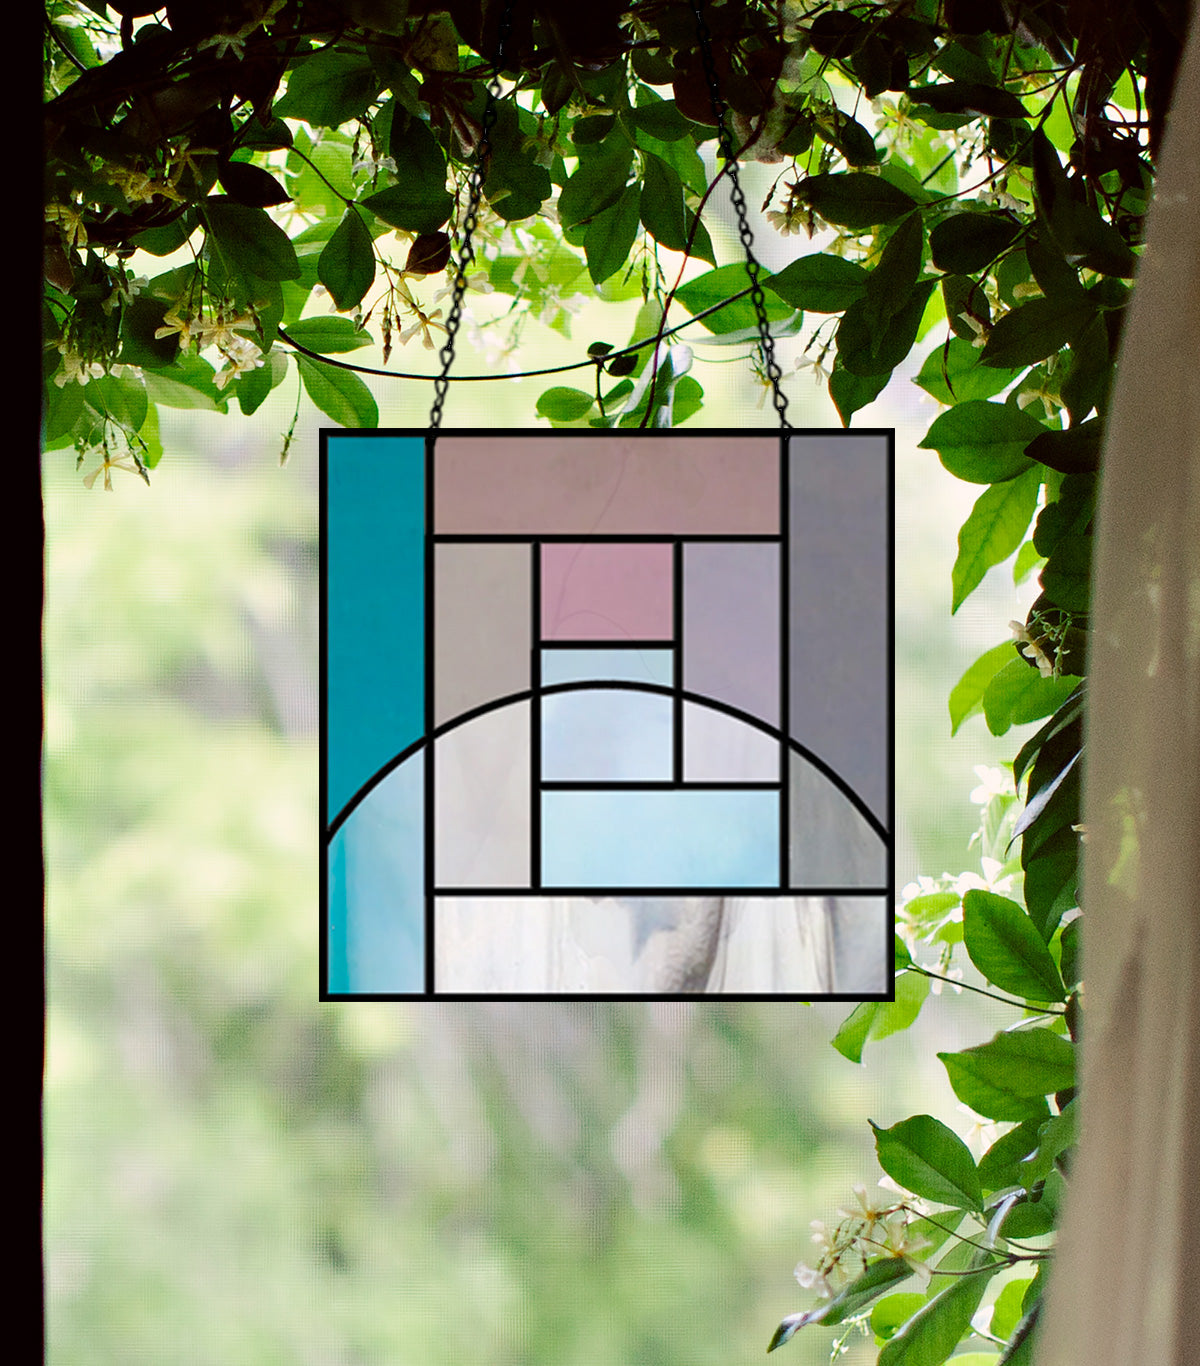 Log Cabin Beginner Stained Glass Pattern